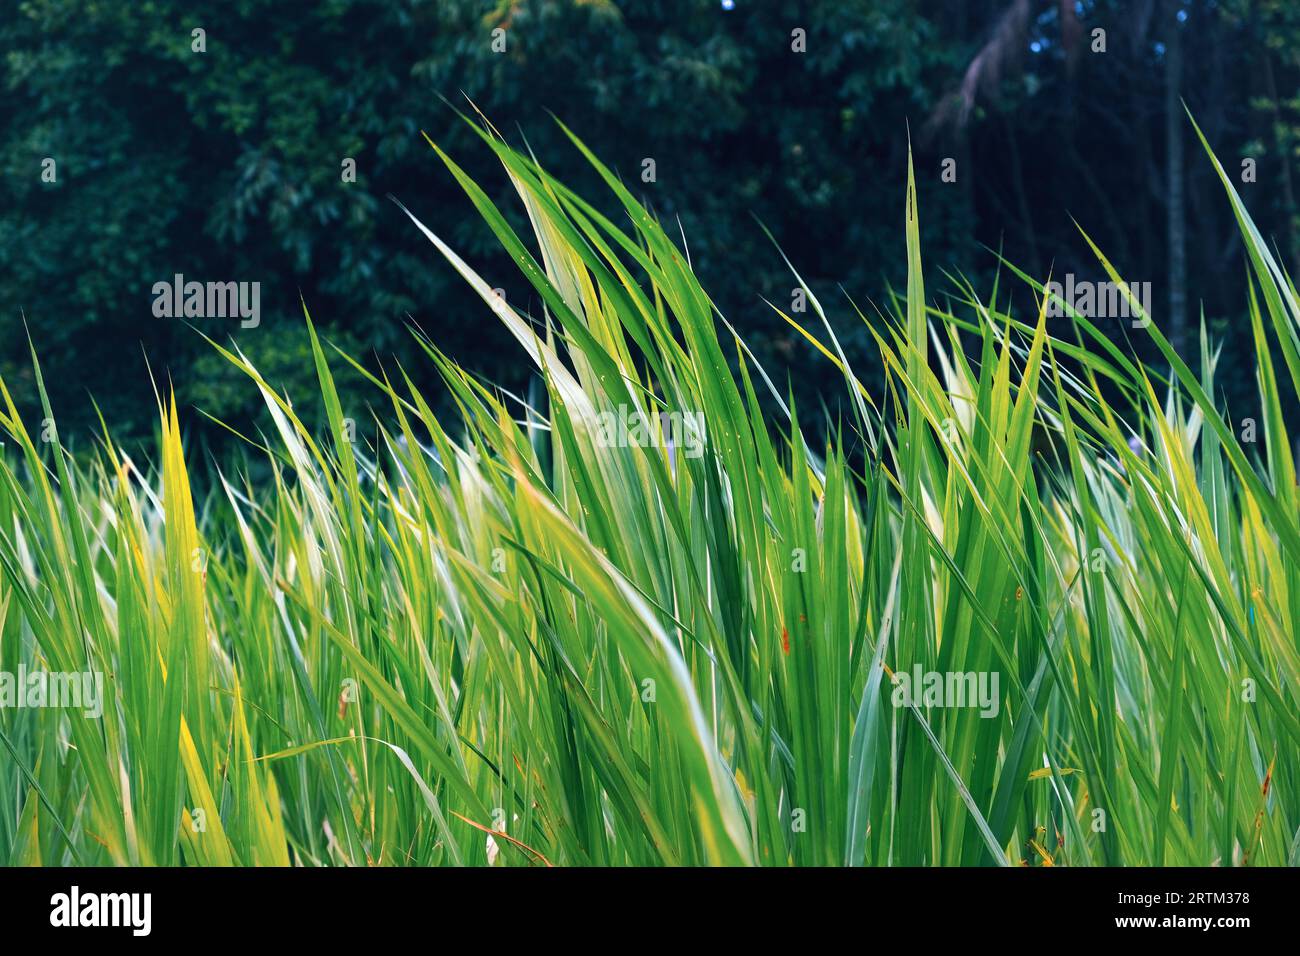 Giant Napier King grass is a perennial tropical grass that is native to African grasslands. It is commonly referred to as elephant grass or Uganda gra Stock Photo